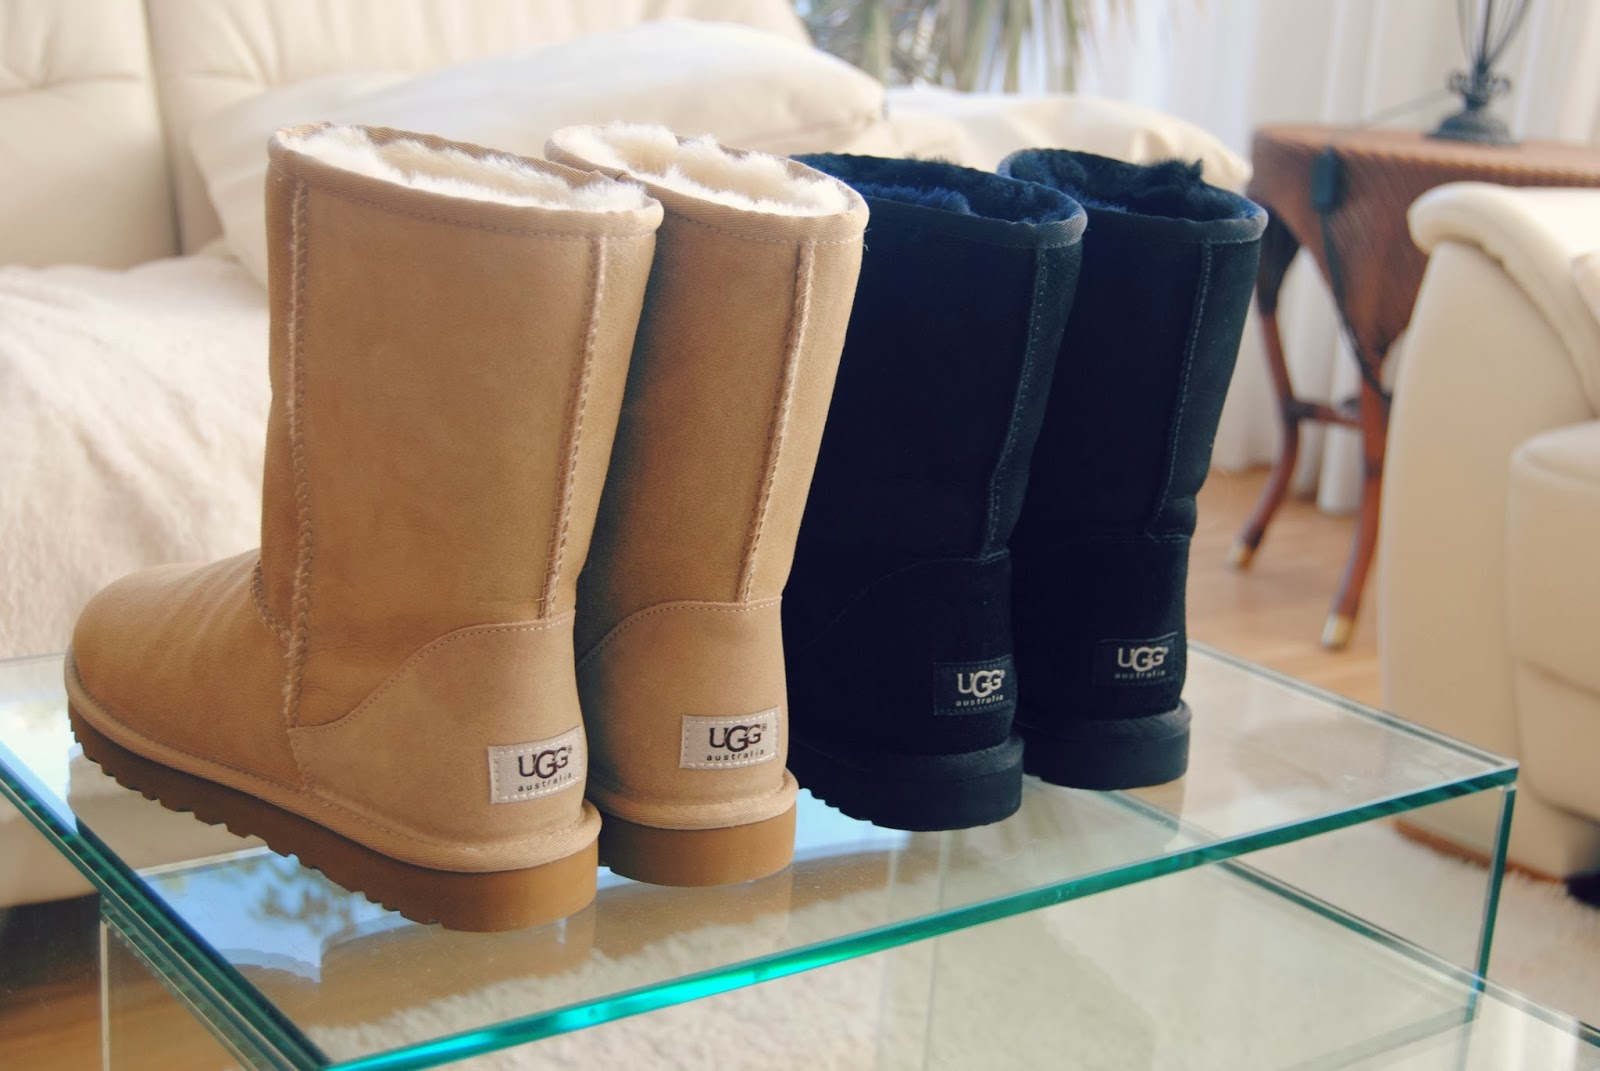 2 UGG Boots for 1